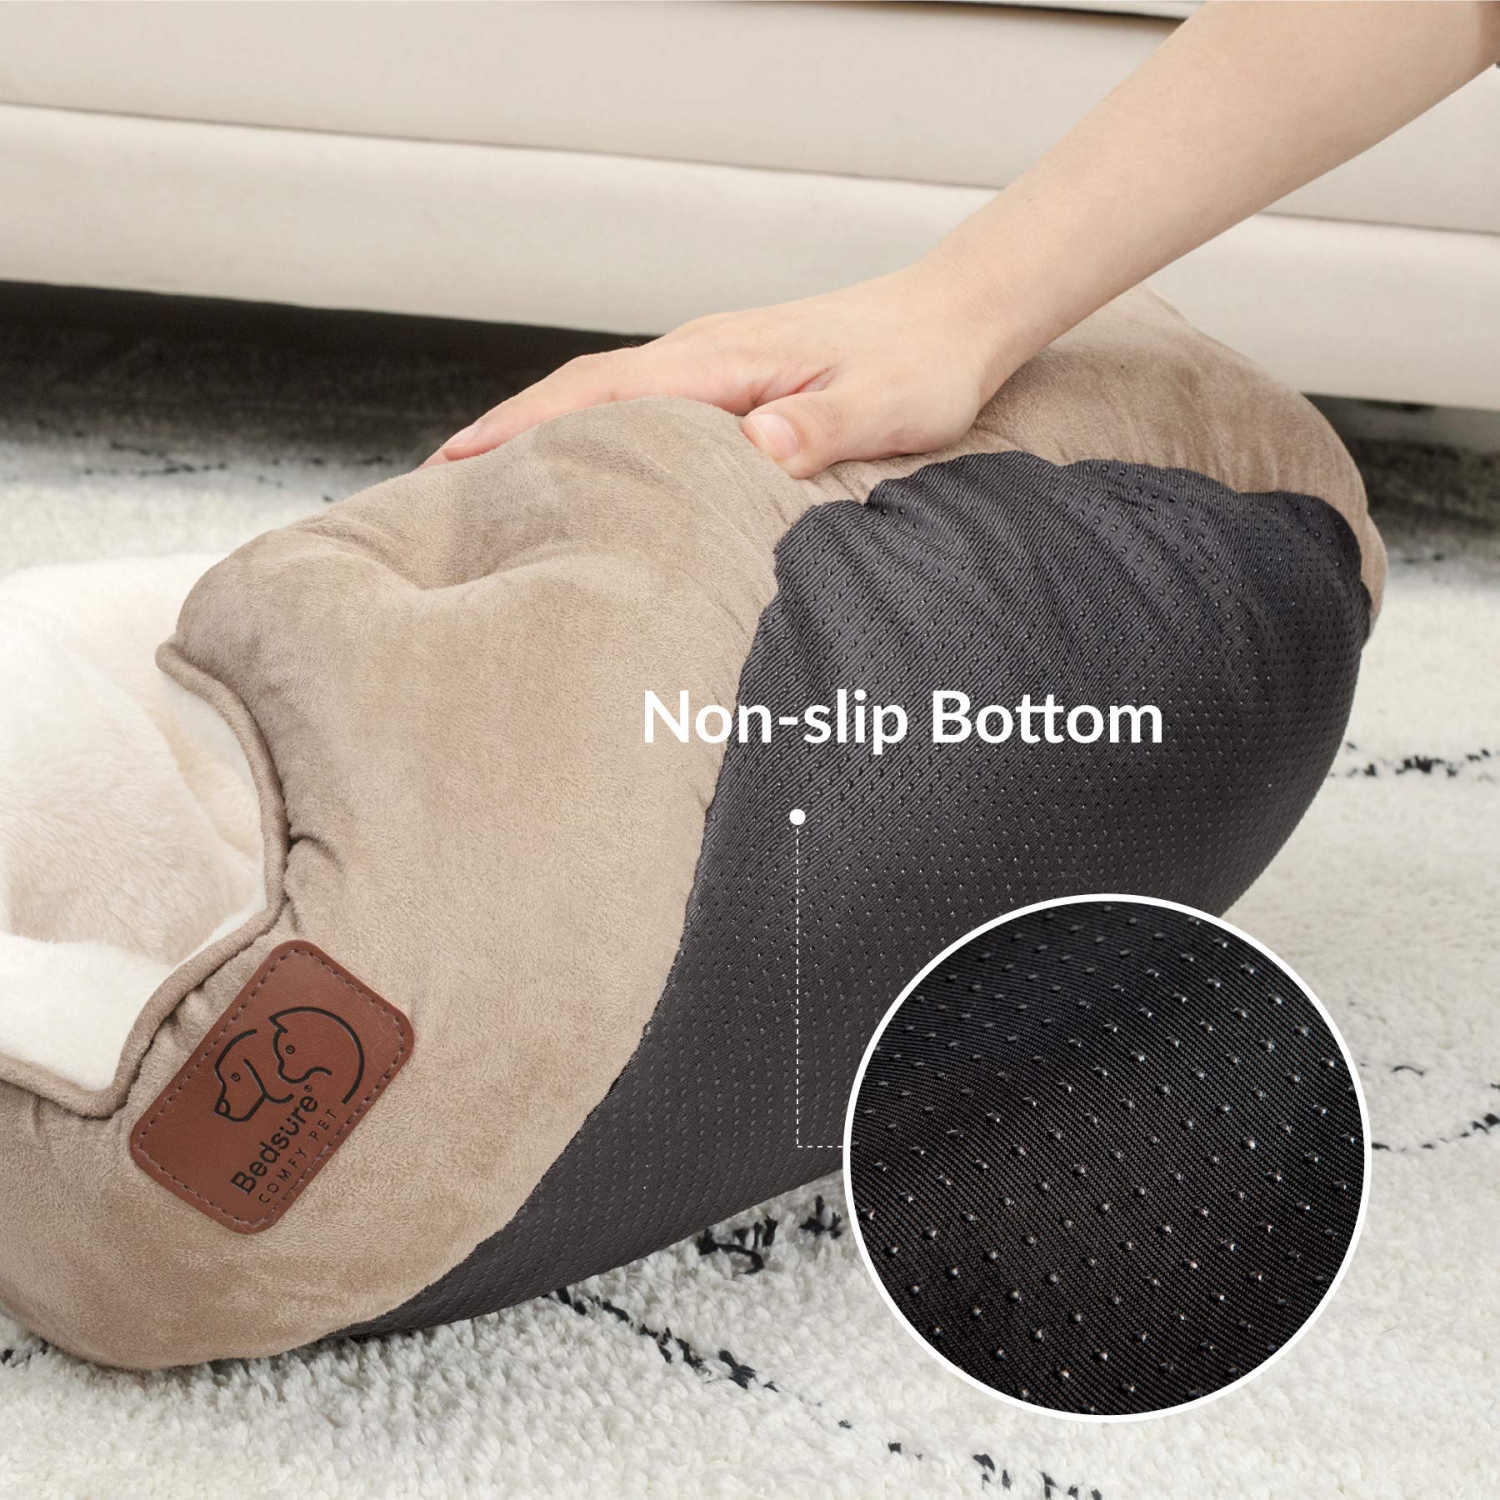 Small Dog Bed for Small Dogs Washable - Round Cat Beds for Indoor